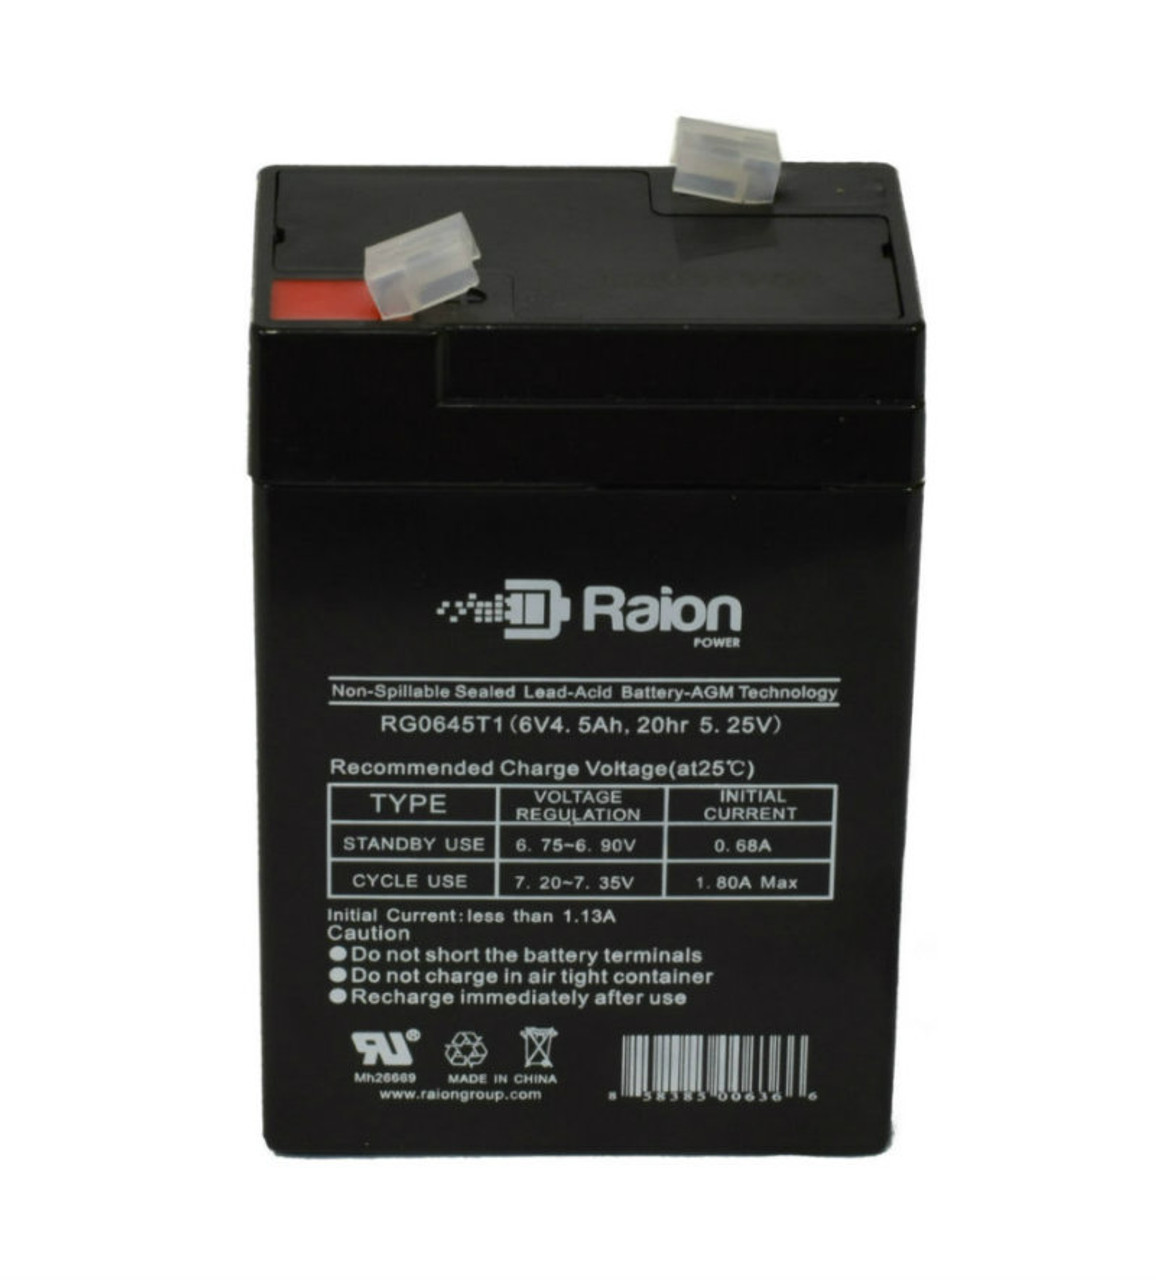 Raion Power RG0645T1 Replacement Battery Cartridge for Light Alarms UXE8